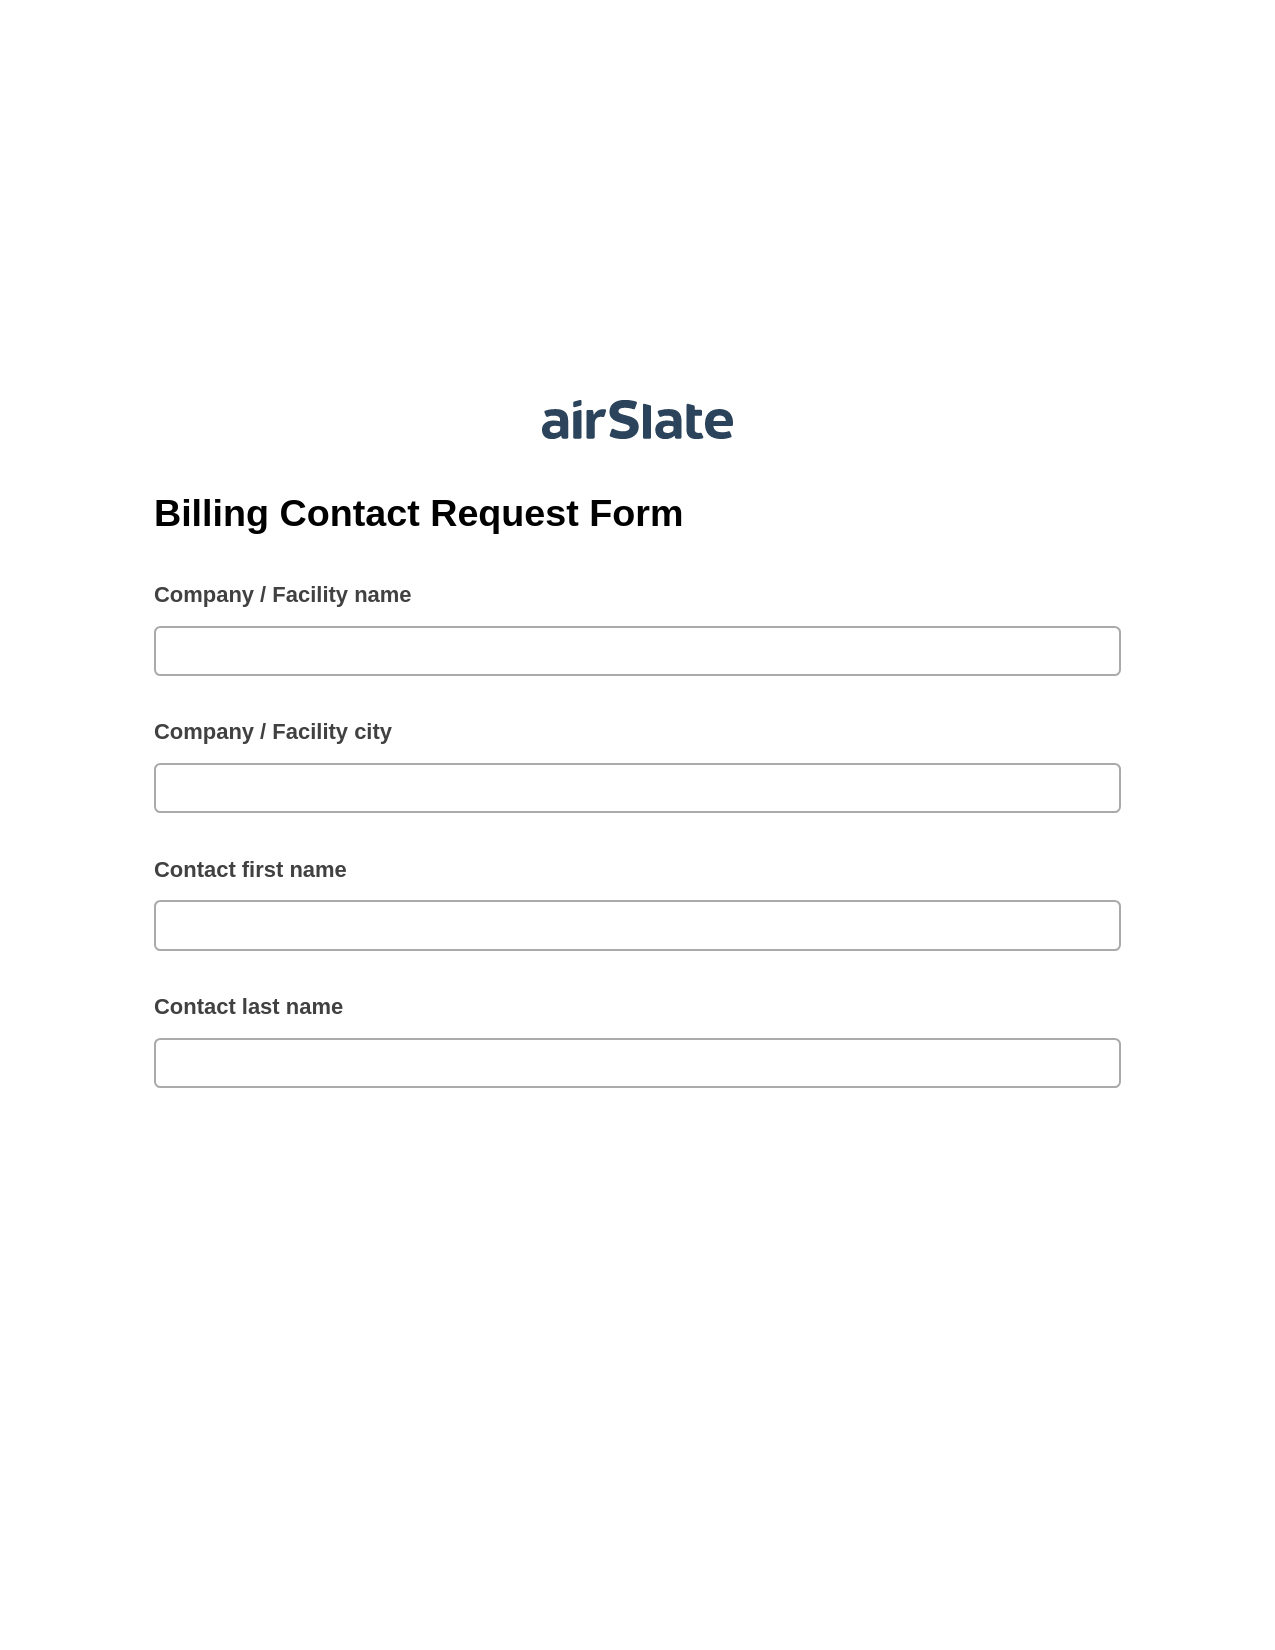 Billing Contact Request Form Pre-fill Document Bot, Create Salesforce Record Bot, Google Drive Bot